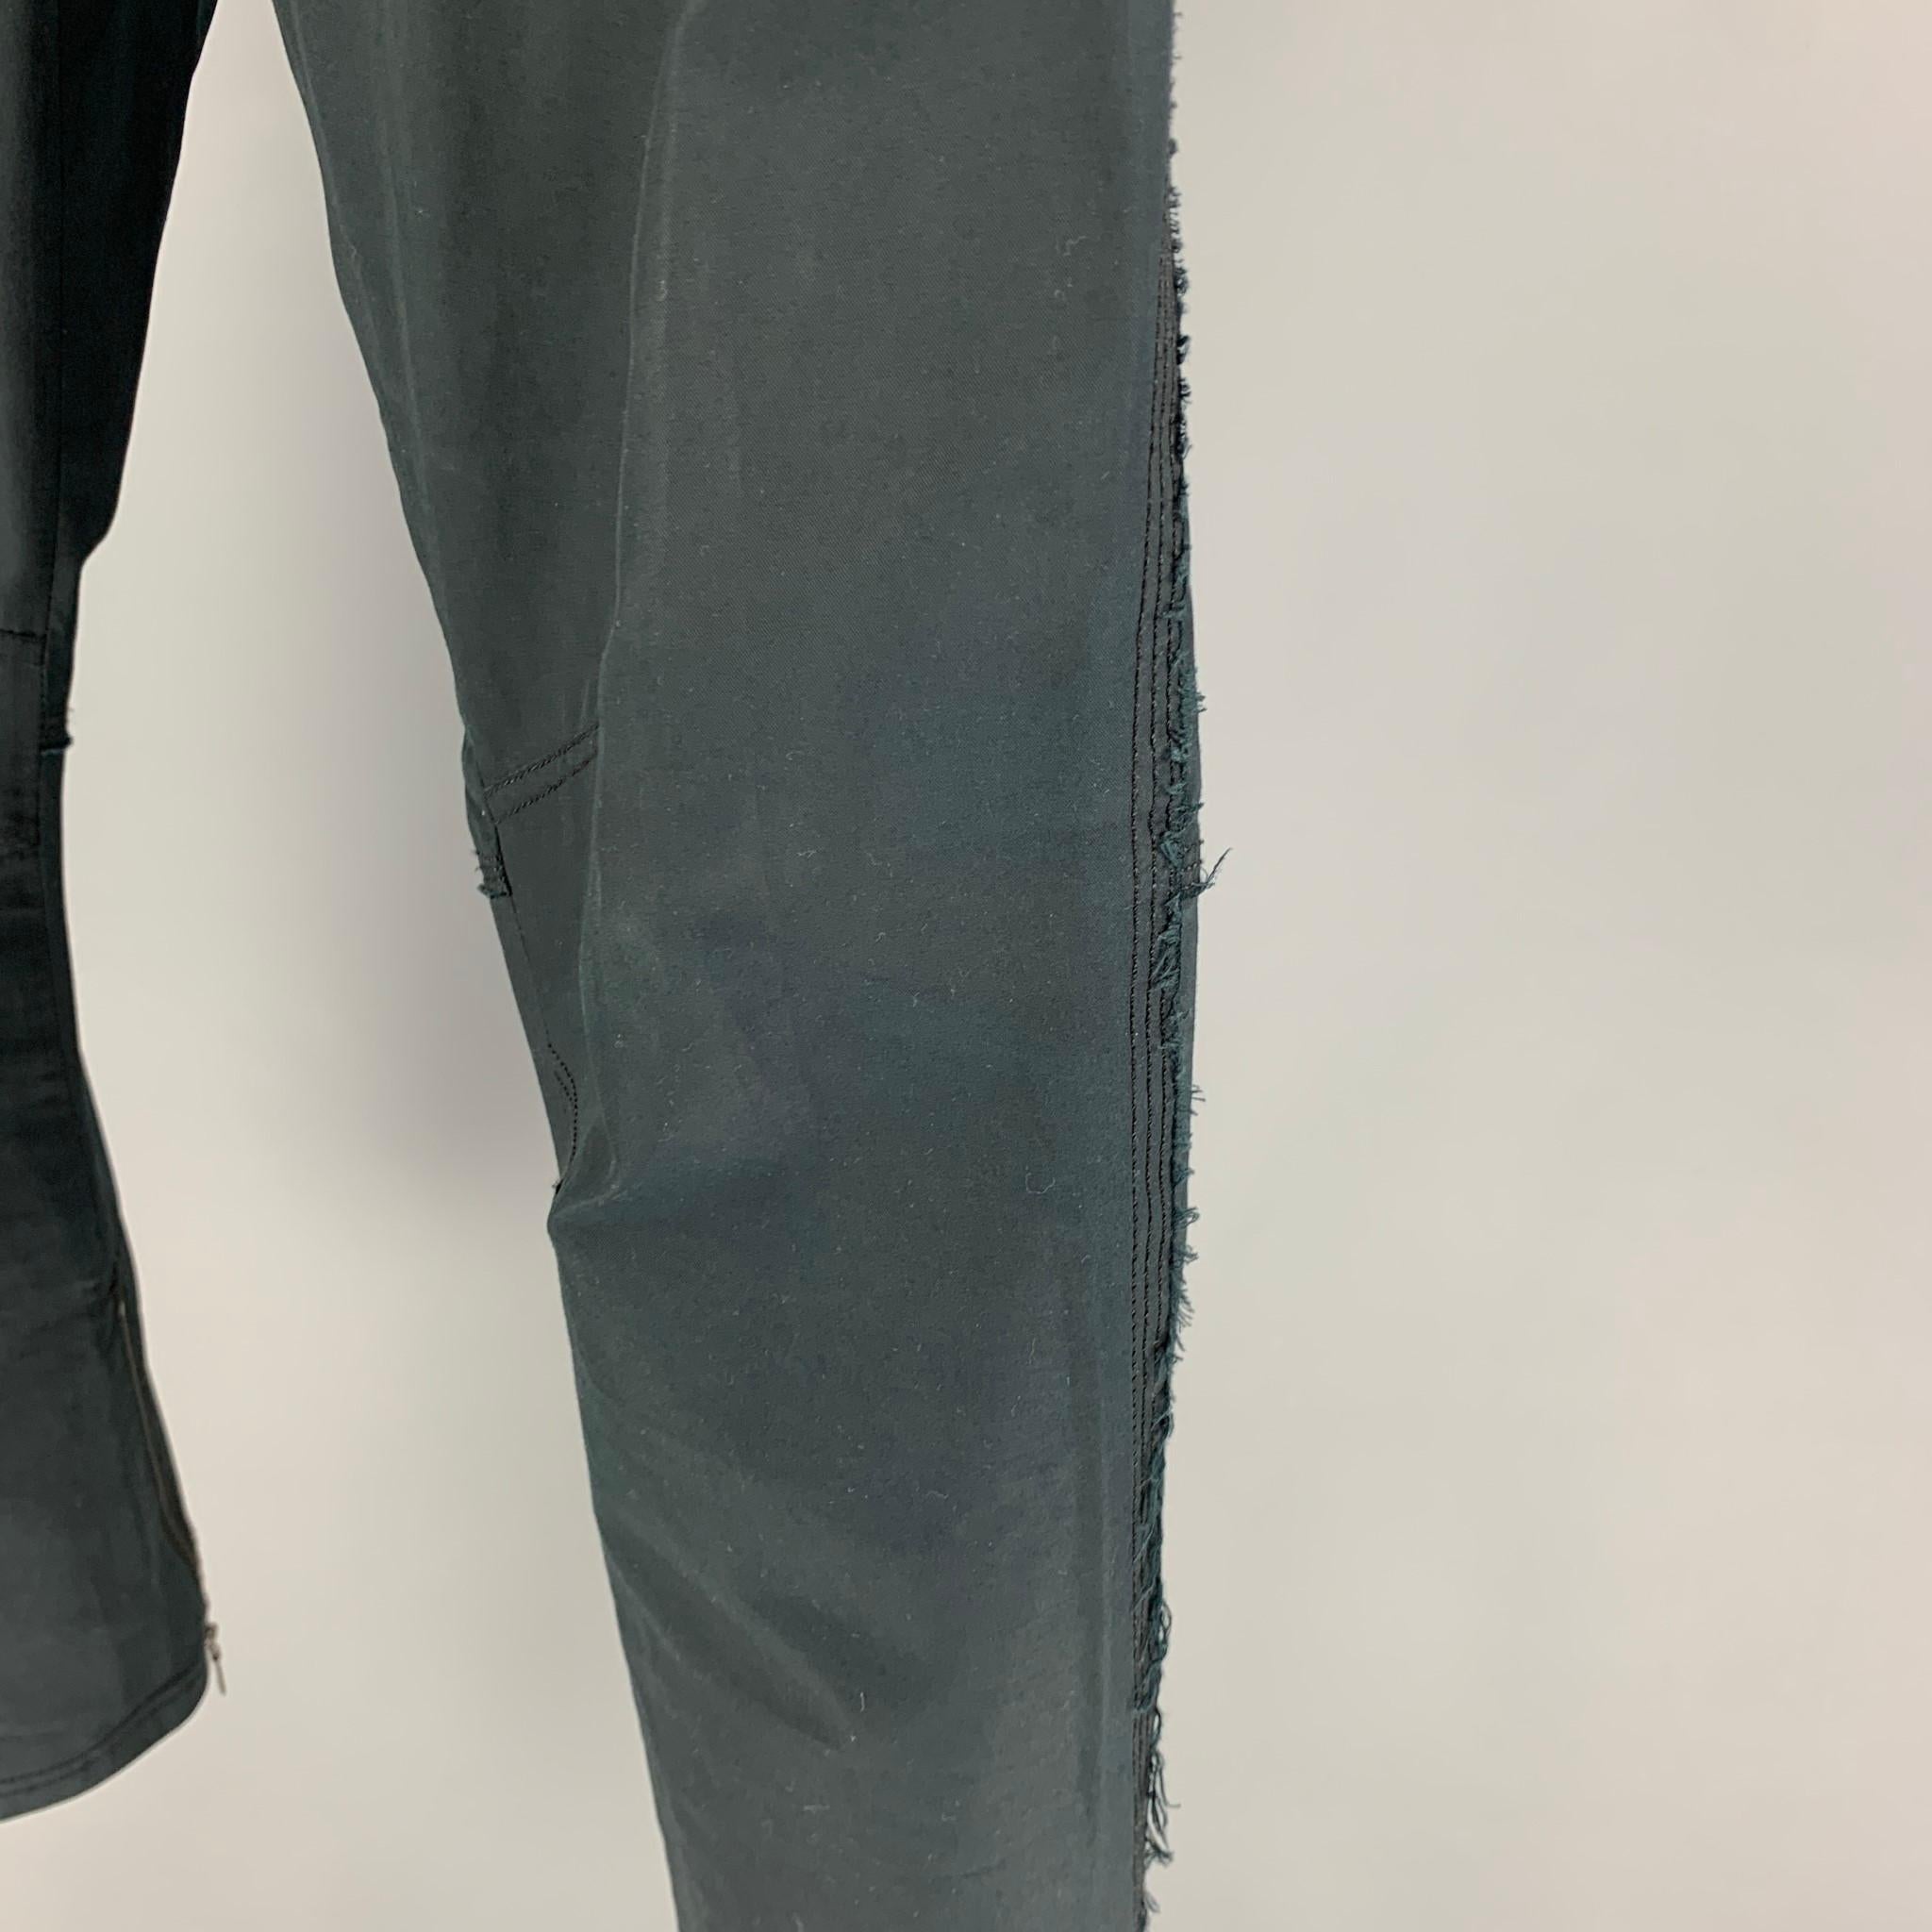 LANVIN pants comes in a navy cotton featuring a slim fit, zipped cuffs, raw edge trim, and a zip fly closure. 

Good Pre-Owned Condition.
Marked: 50

Measurements:

Waist: 34 in.
Rise: 10 in.
Inseam: 29 in. 